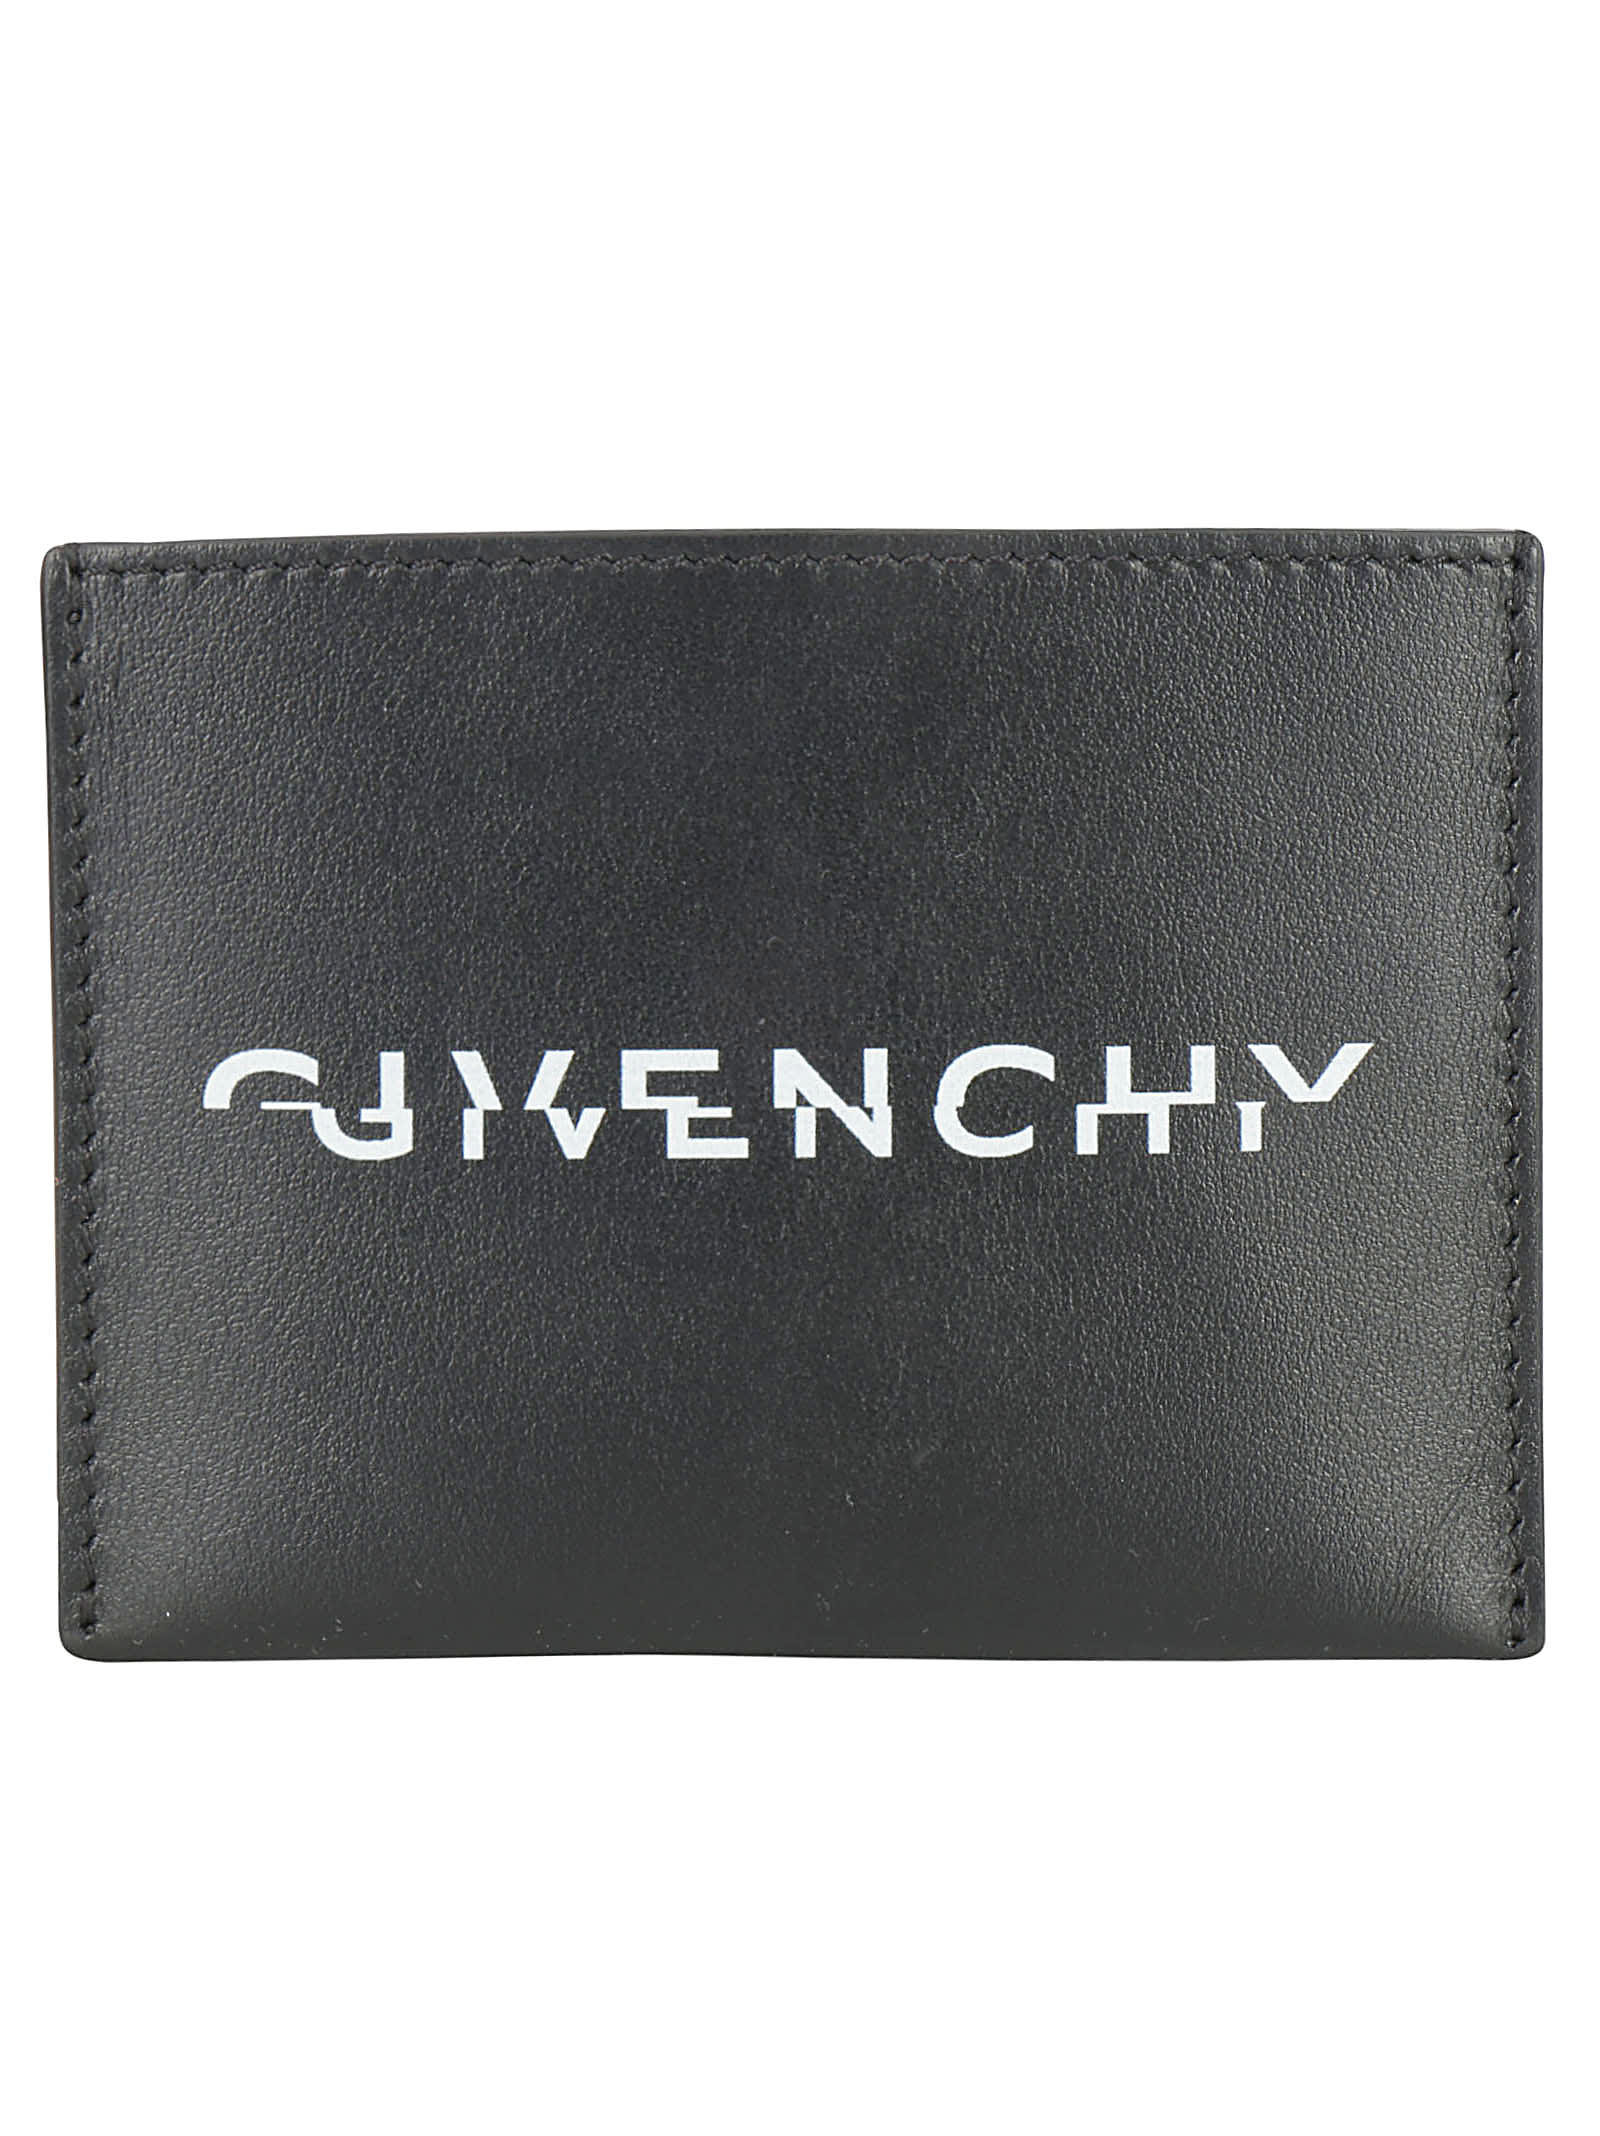 Givenchy Card Holder In Black/white